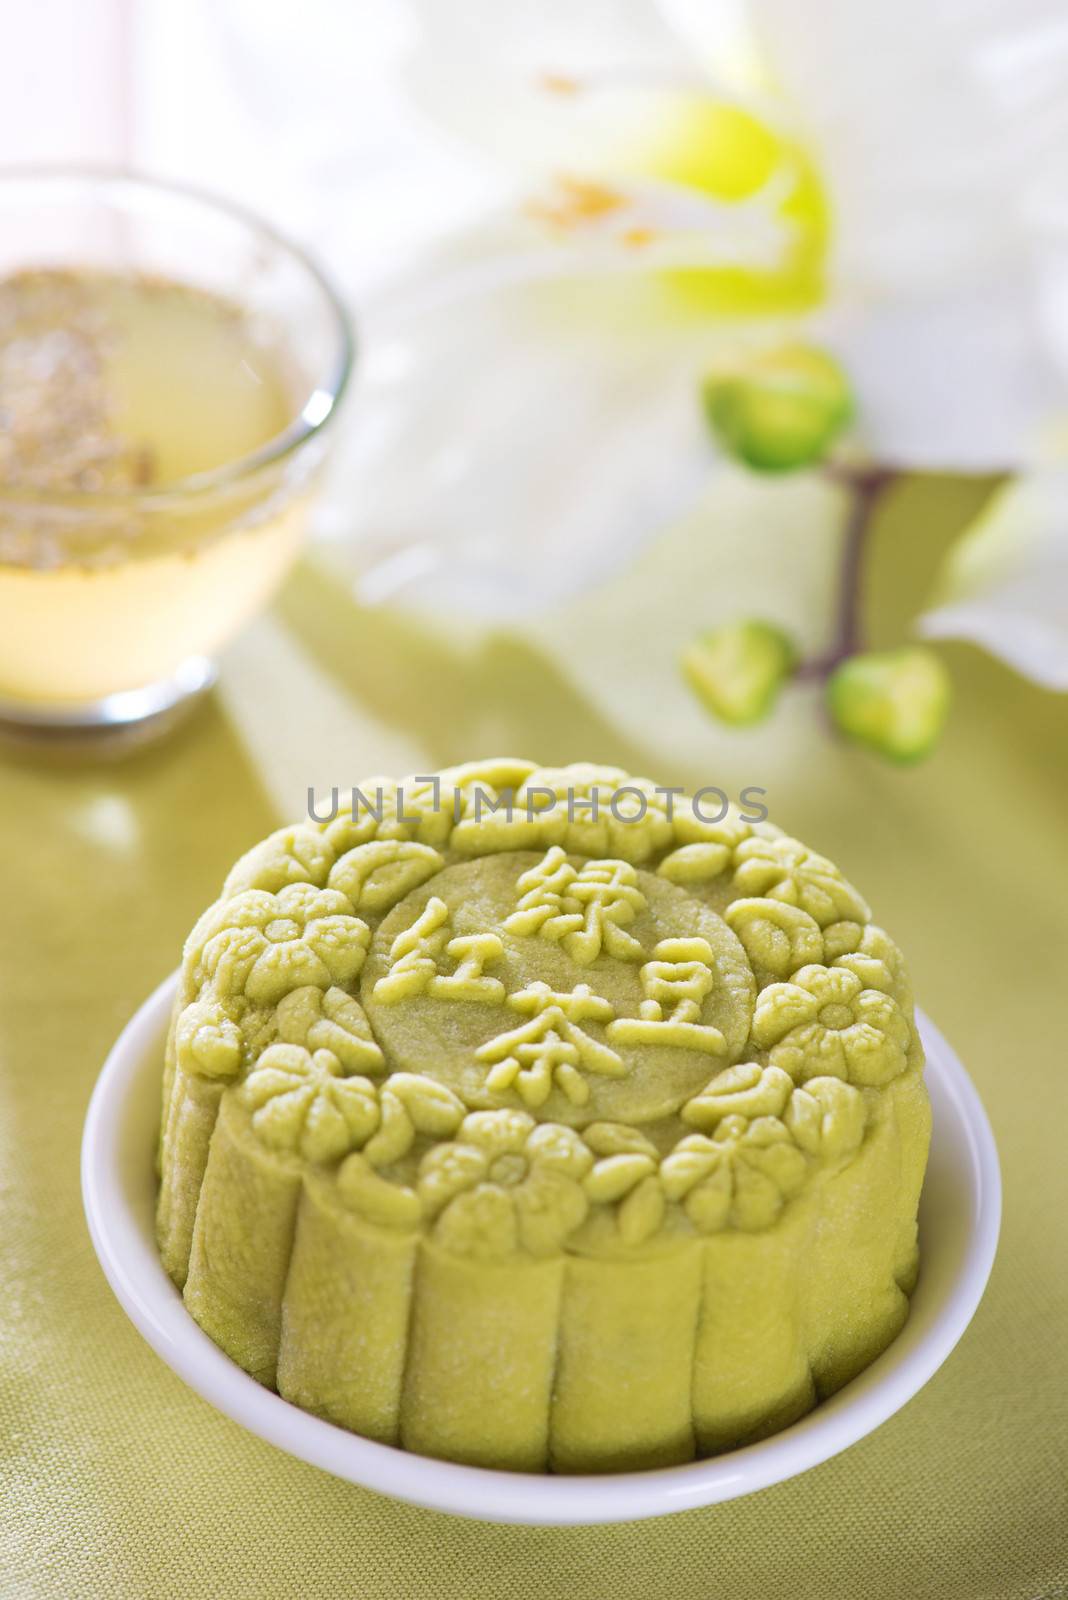 Snowy skin mooncakes.  Traditional Chinese mid autumn festival food. The Chinese words on the mooncakes means green tea with red bean paste, not a logo or trademark.